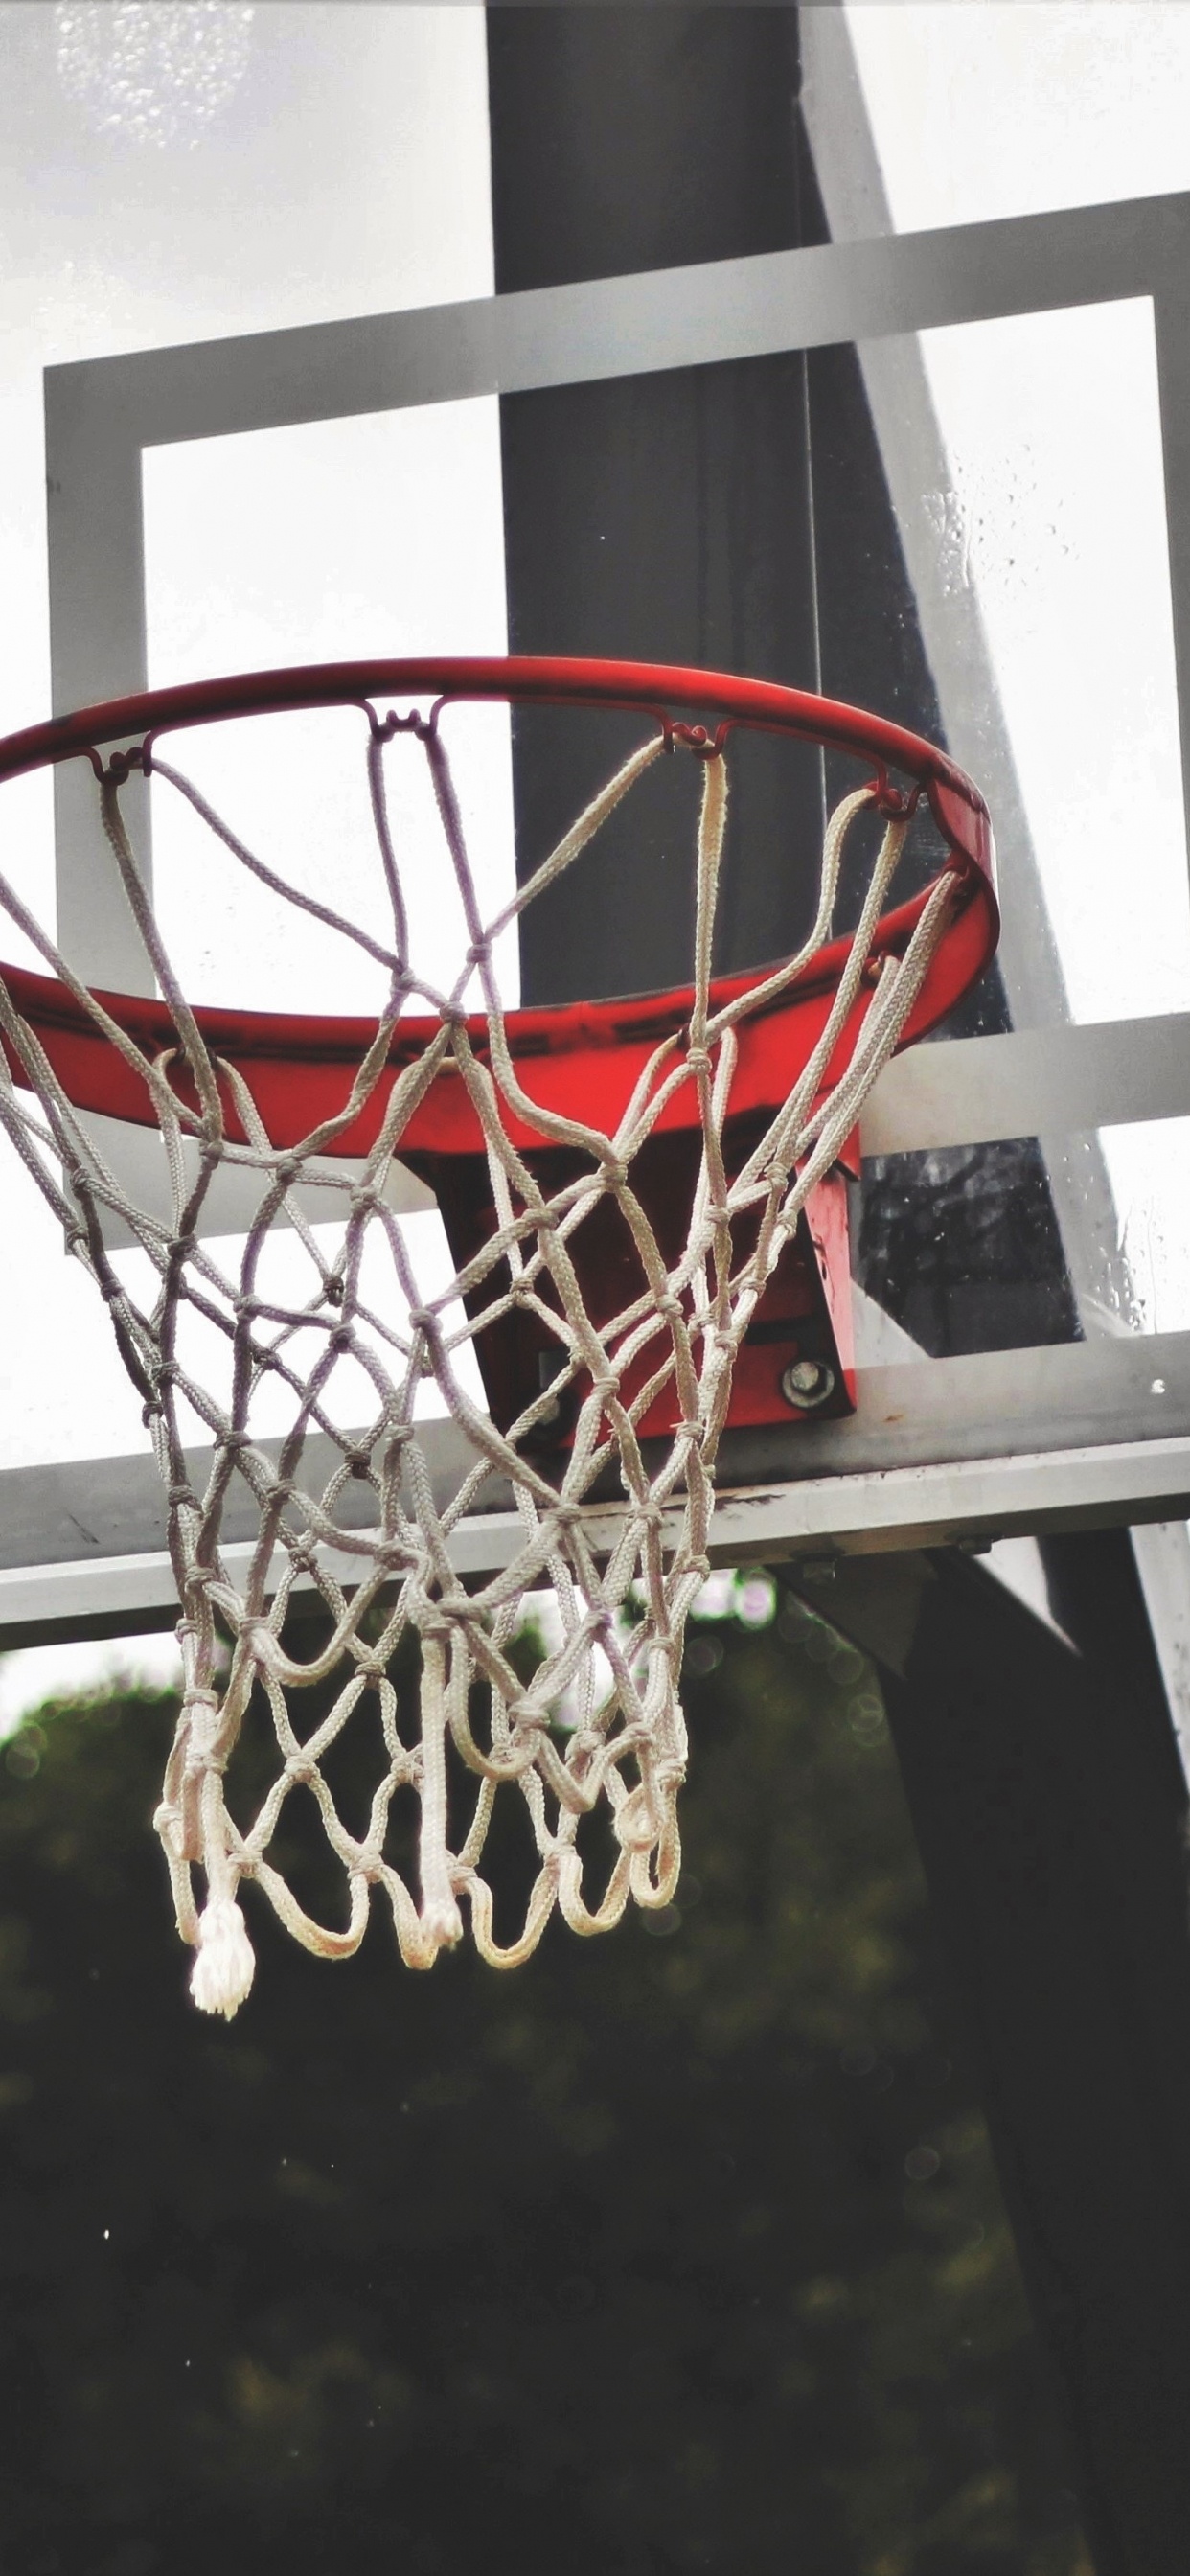 Black and Red Basketball Hoop. Wallpaper in 1242x2688 Resolution